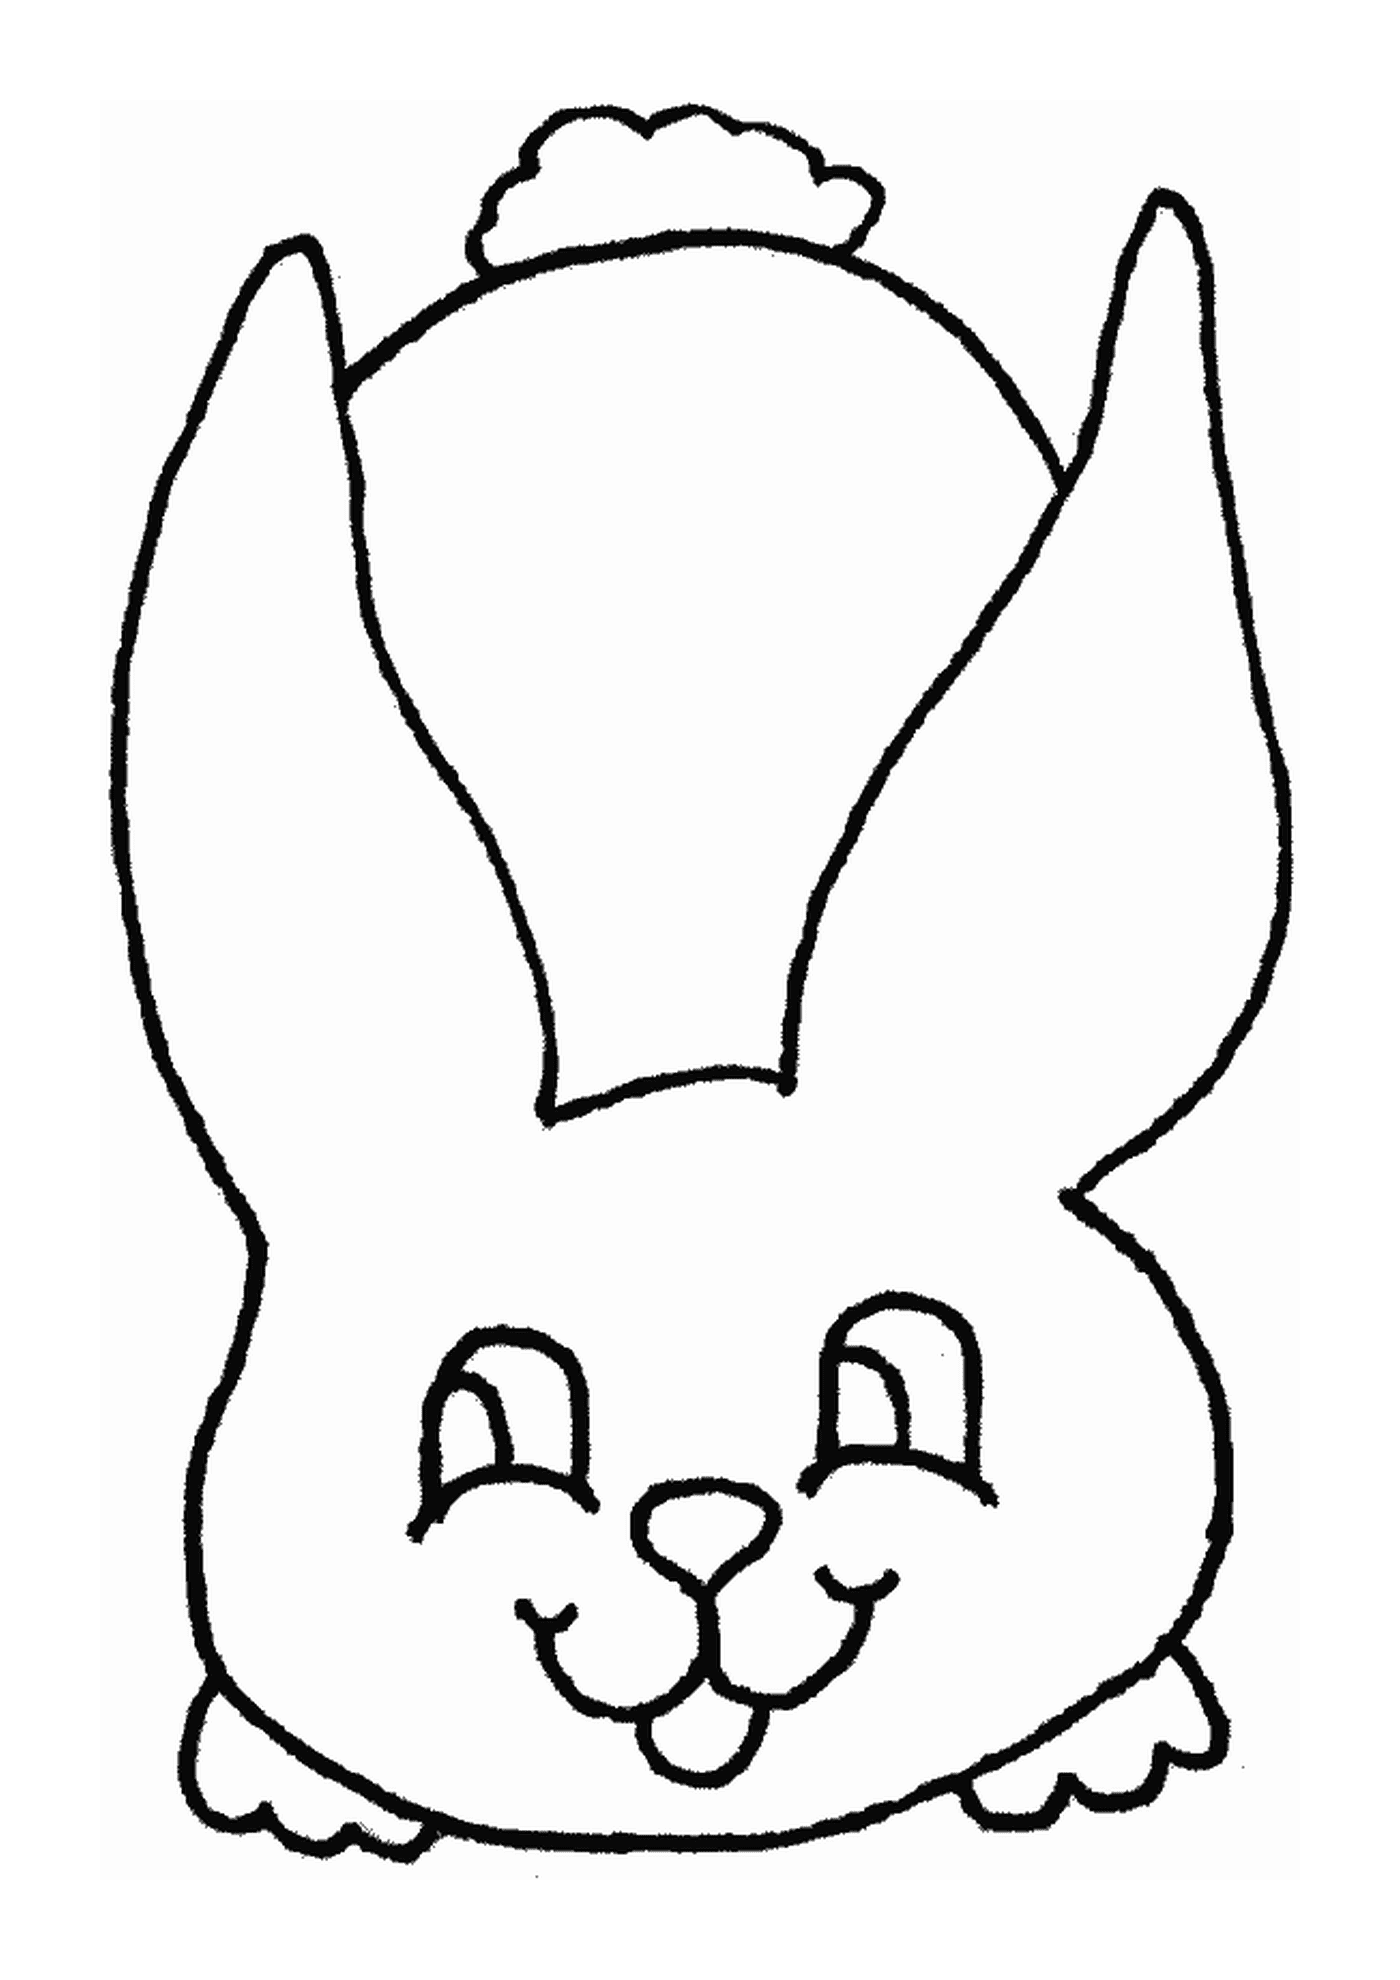  Rabbit drawn from the front 